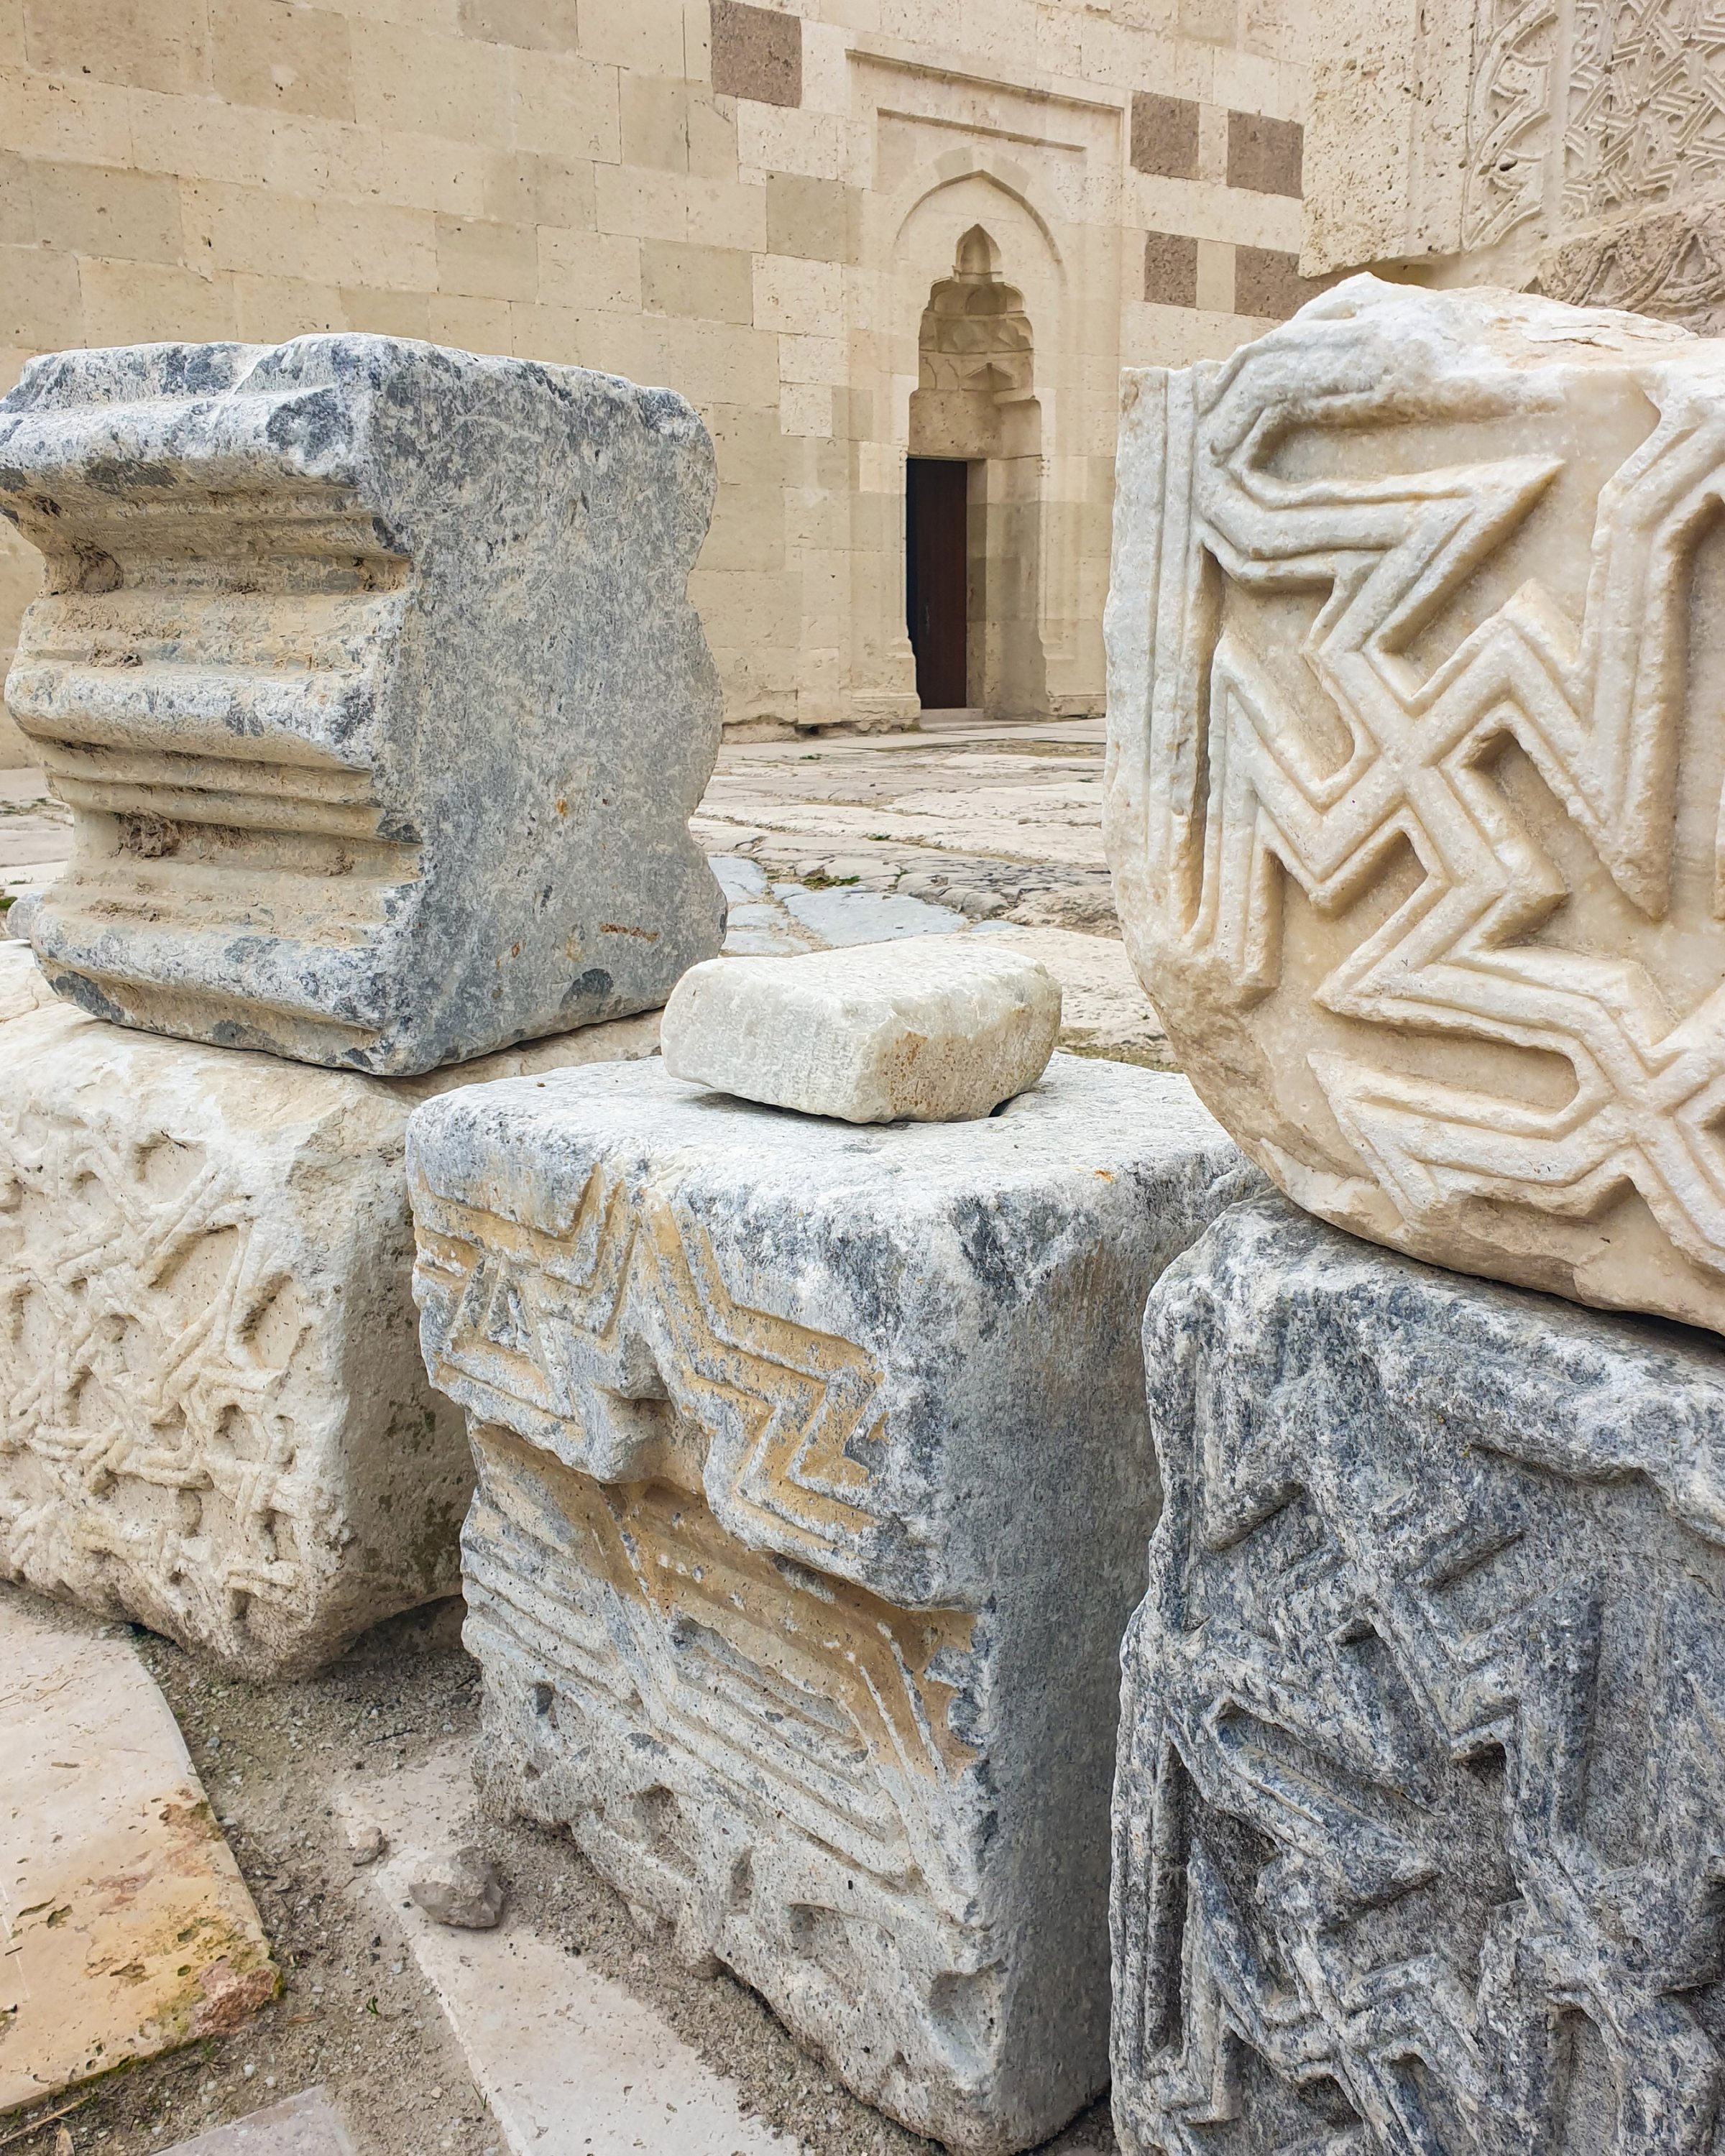 Architectural fragments displayed at the open-air hall of the Sultanhan Caravanserai. (Photo by Argun Konuk)